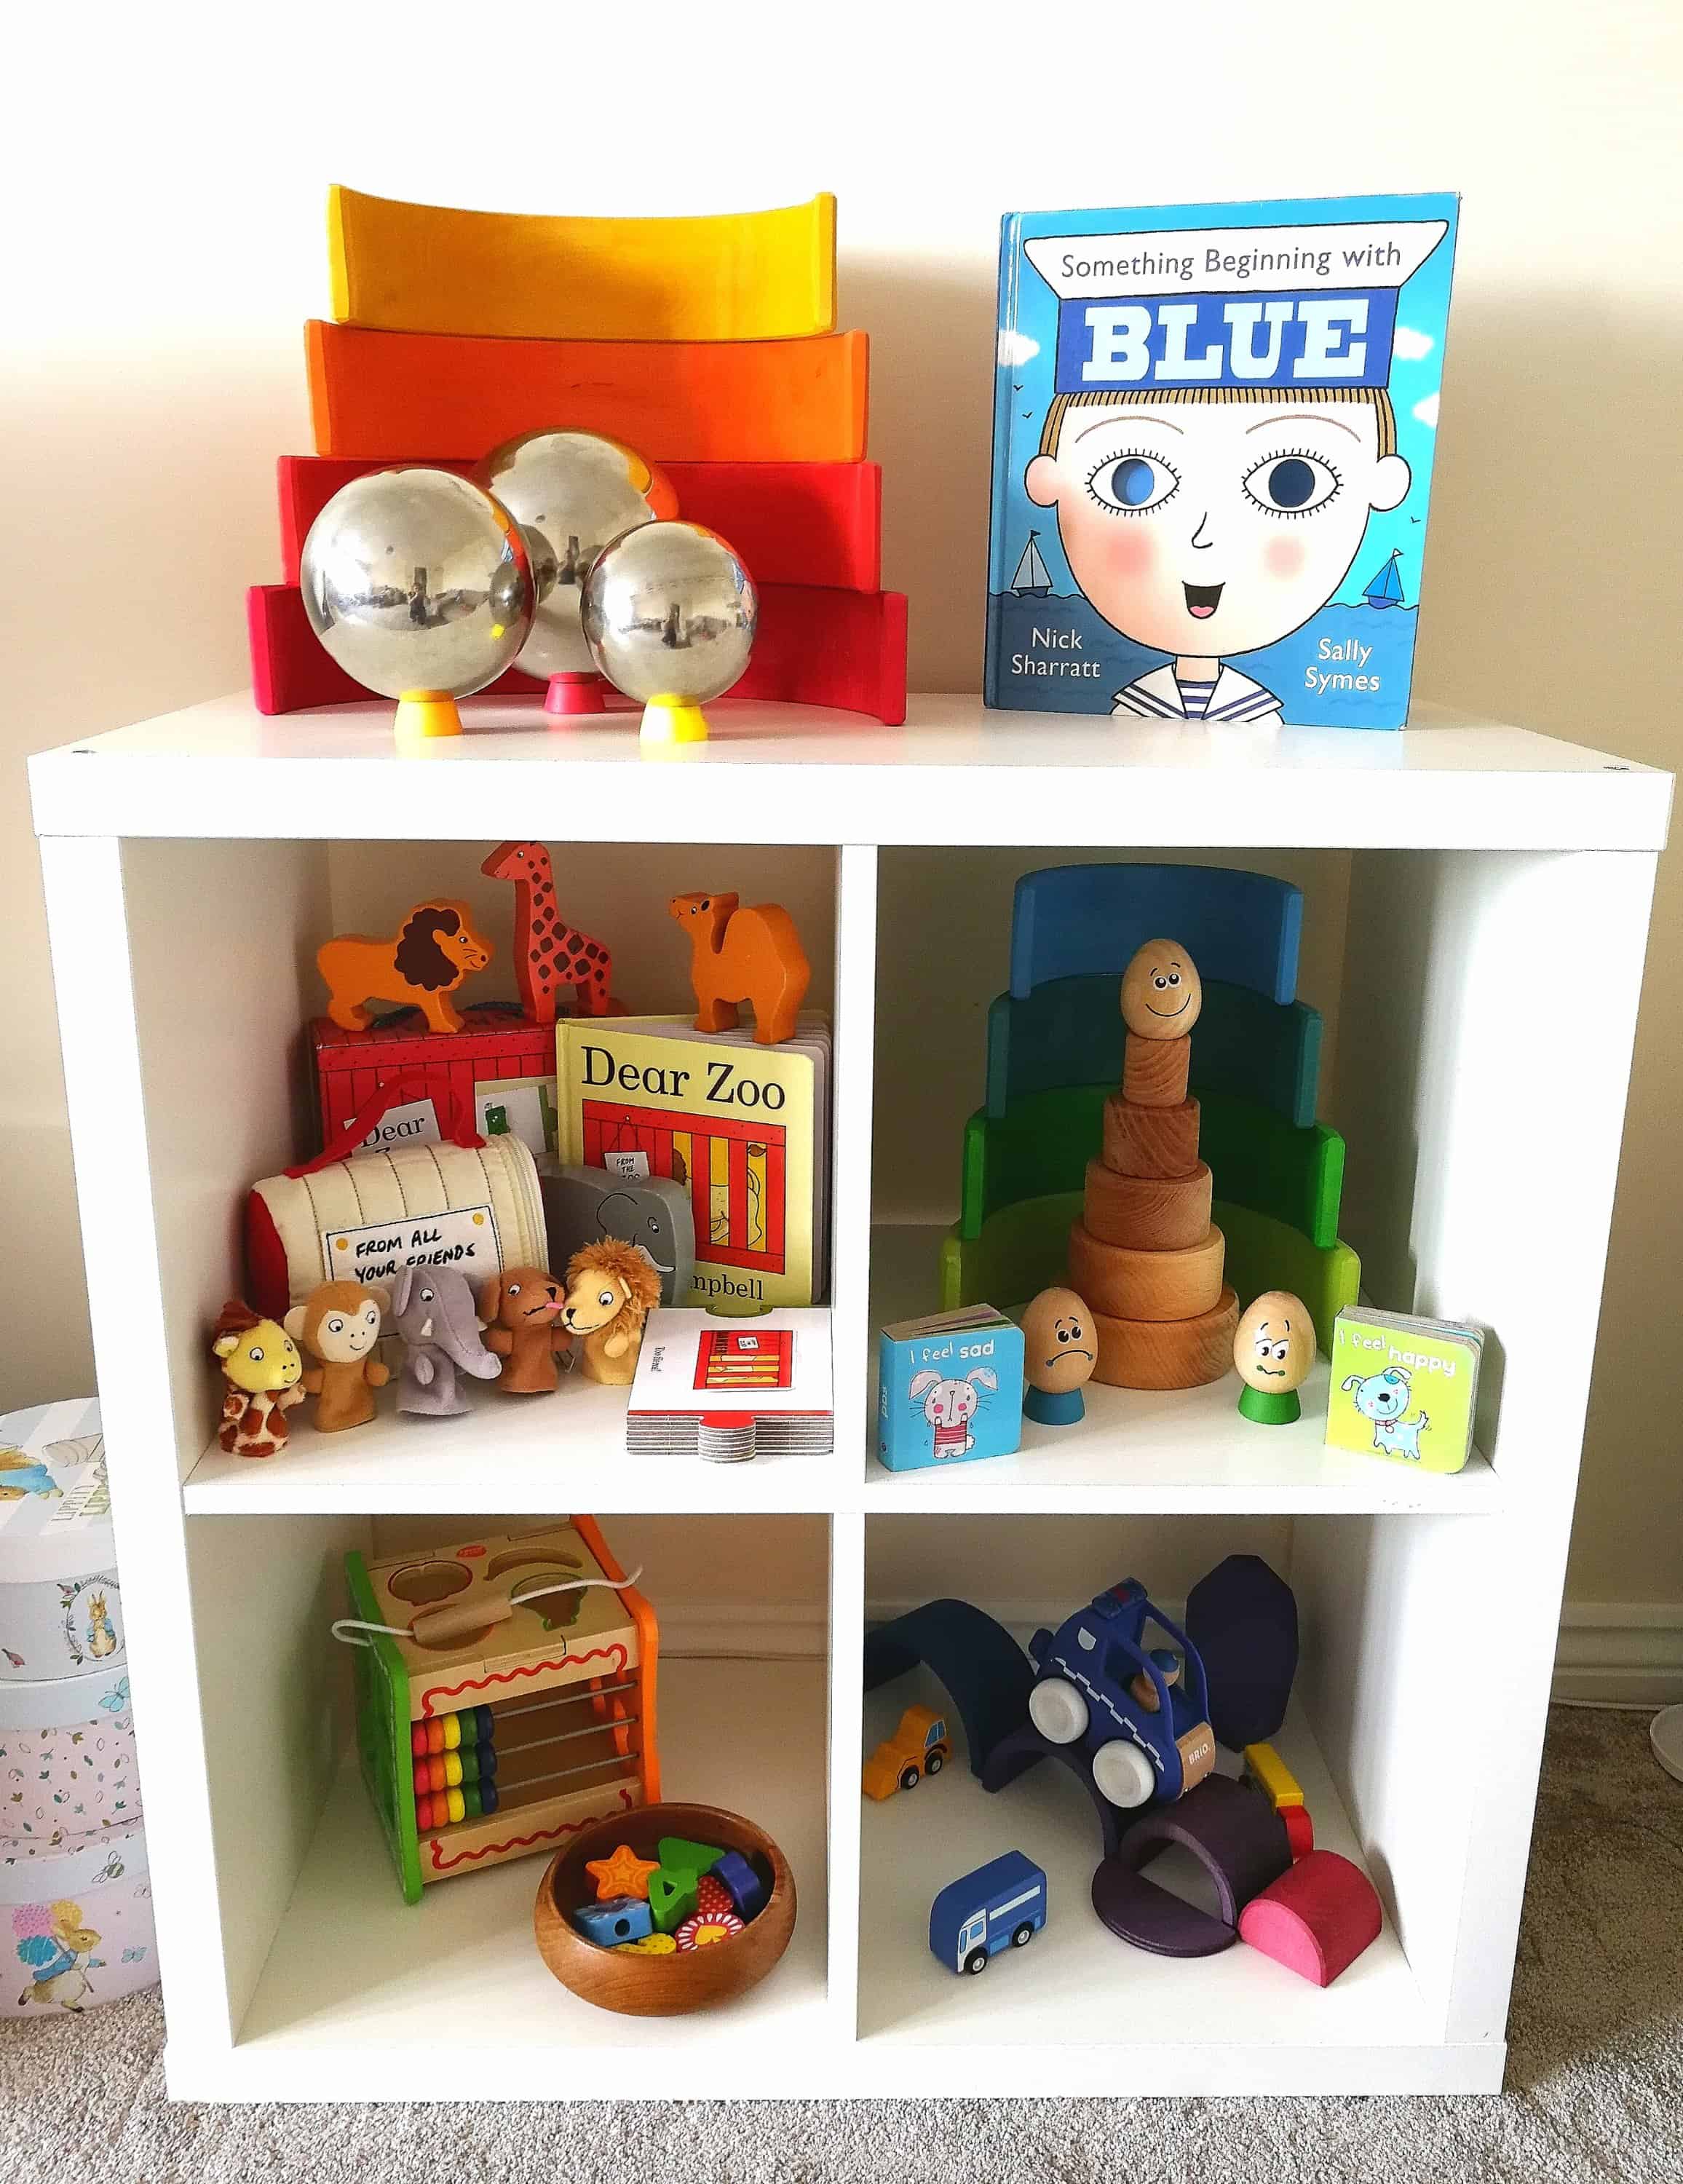 Shelfie - - Dear Zoo - Rod Campbell - Nick Sharratt - early years - toddler play - Grimms - Hape - Melissa & Doug - Ocamora - Wooden Toys - Feelings - Emotions - Construction - Stacking- Mindfulness - Puzzles - Jigsaws - Colours - Matching - Language - Words - Music - Textures - Vehicles